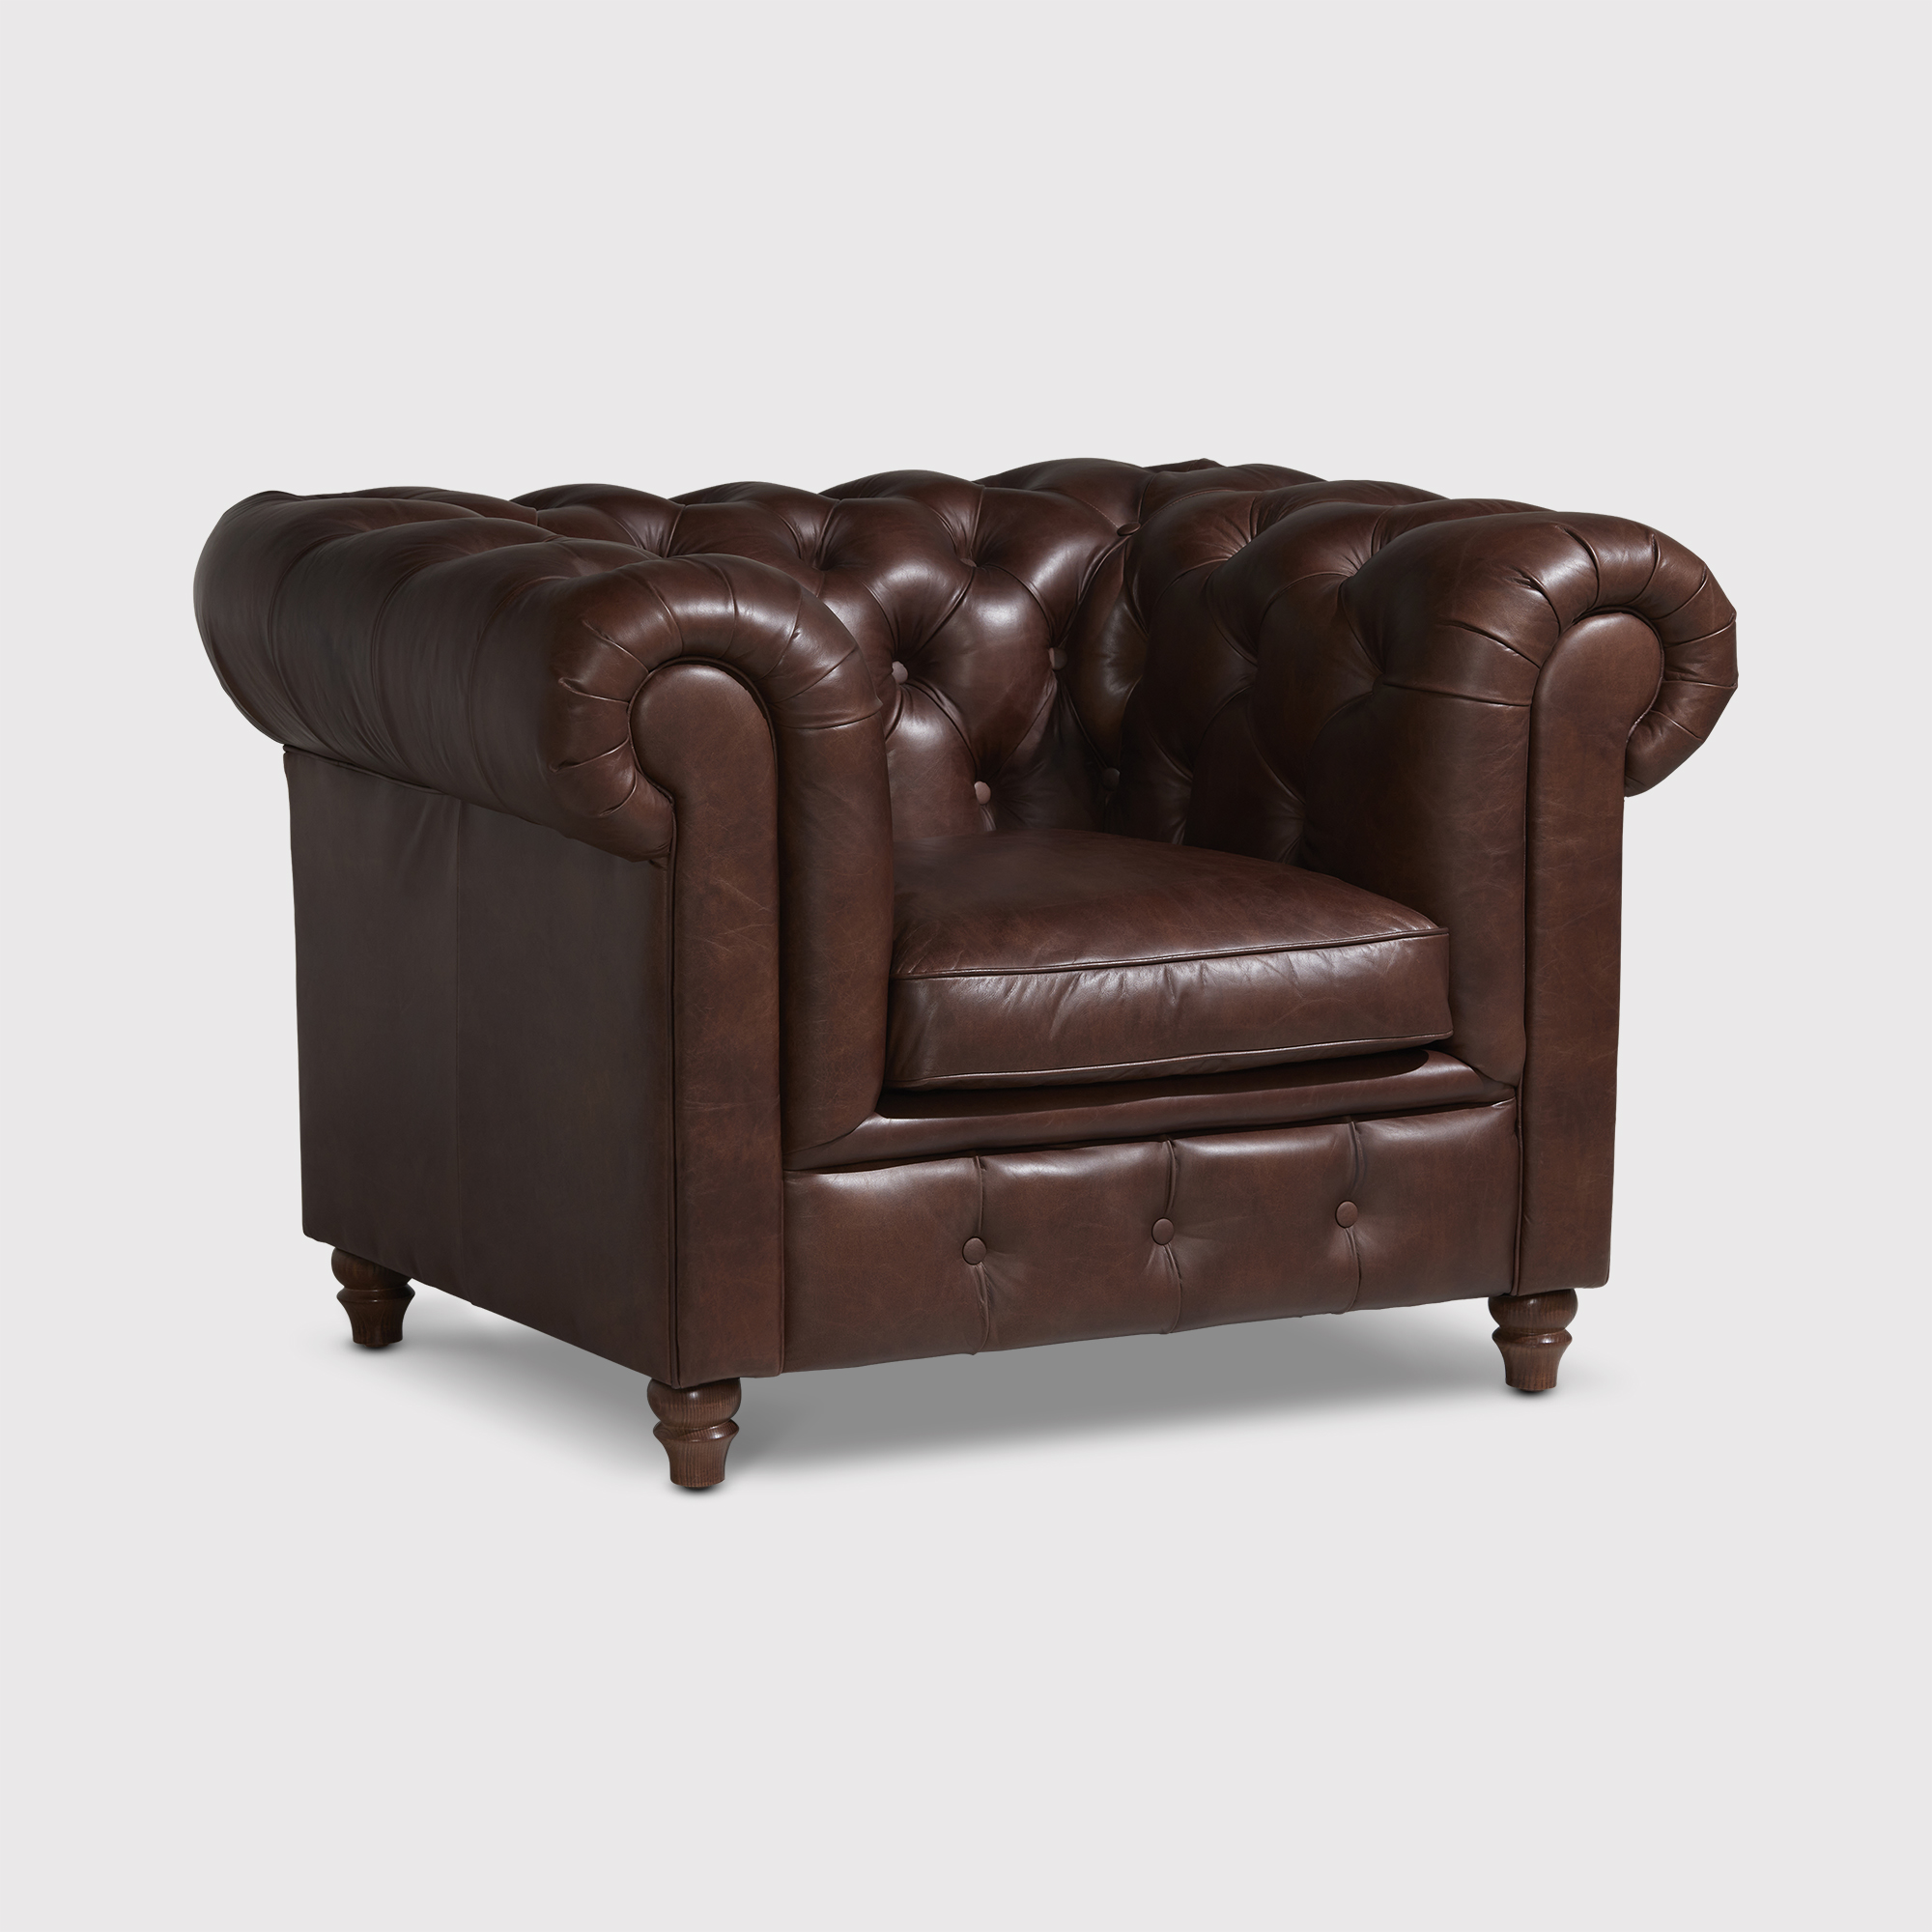 Dalston 1 Seater Sofa, Brown Leather | Barker & Stonehouse